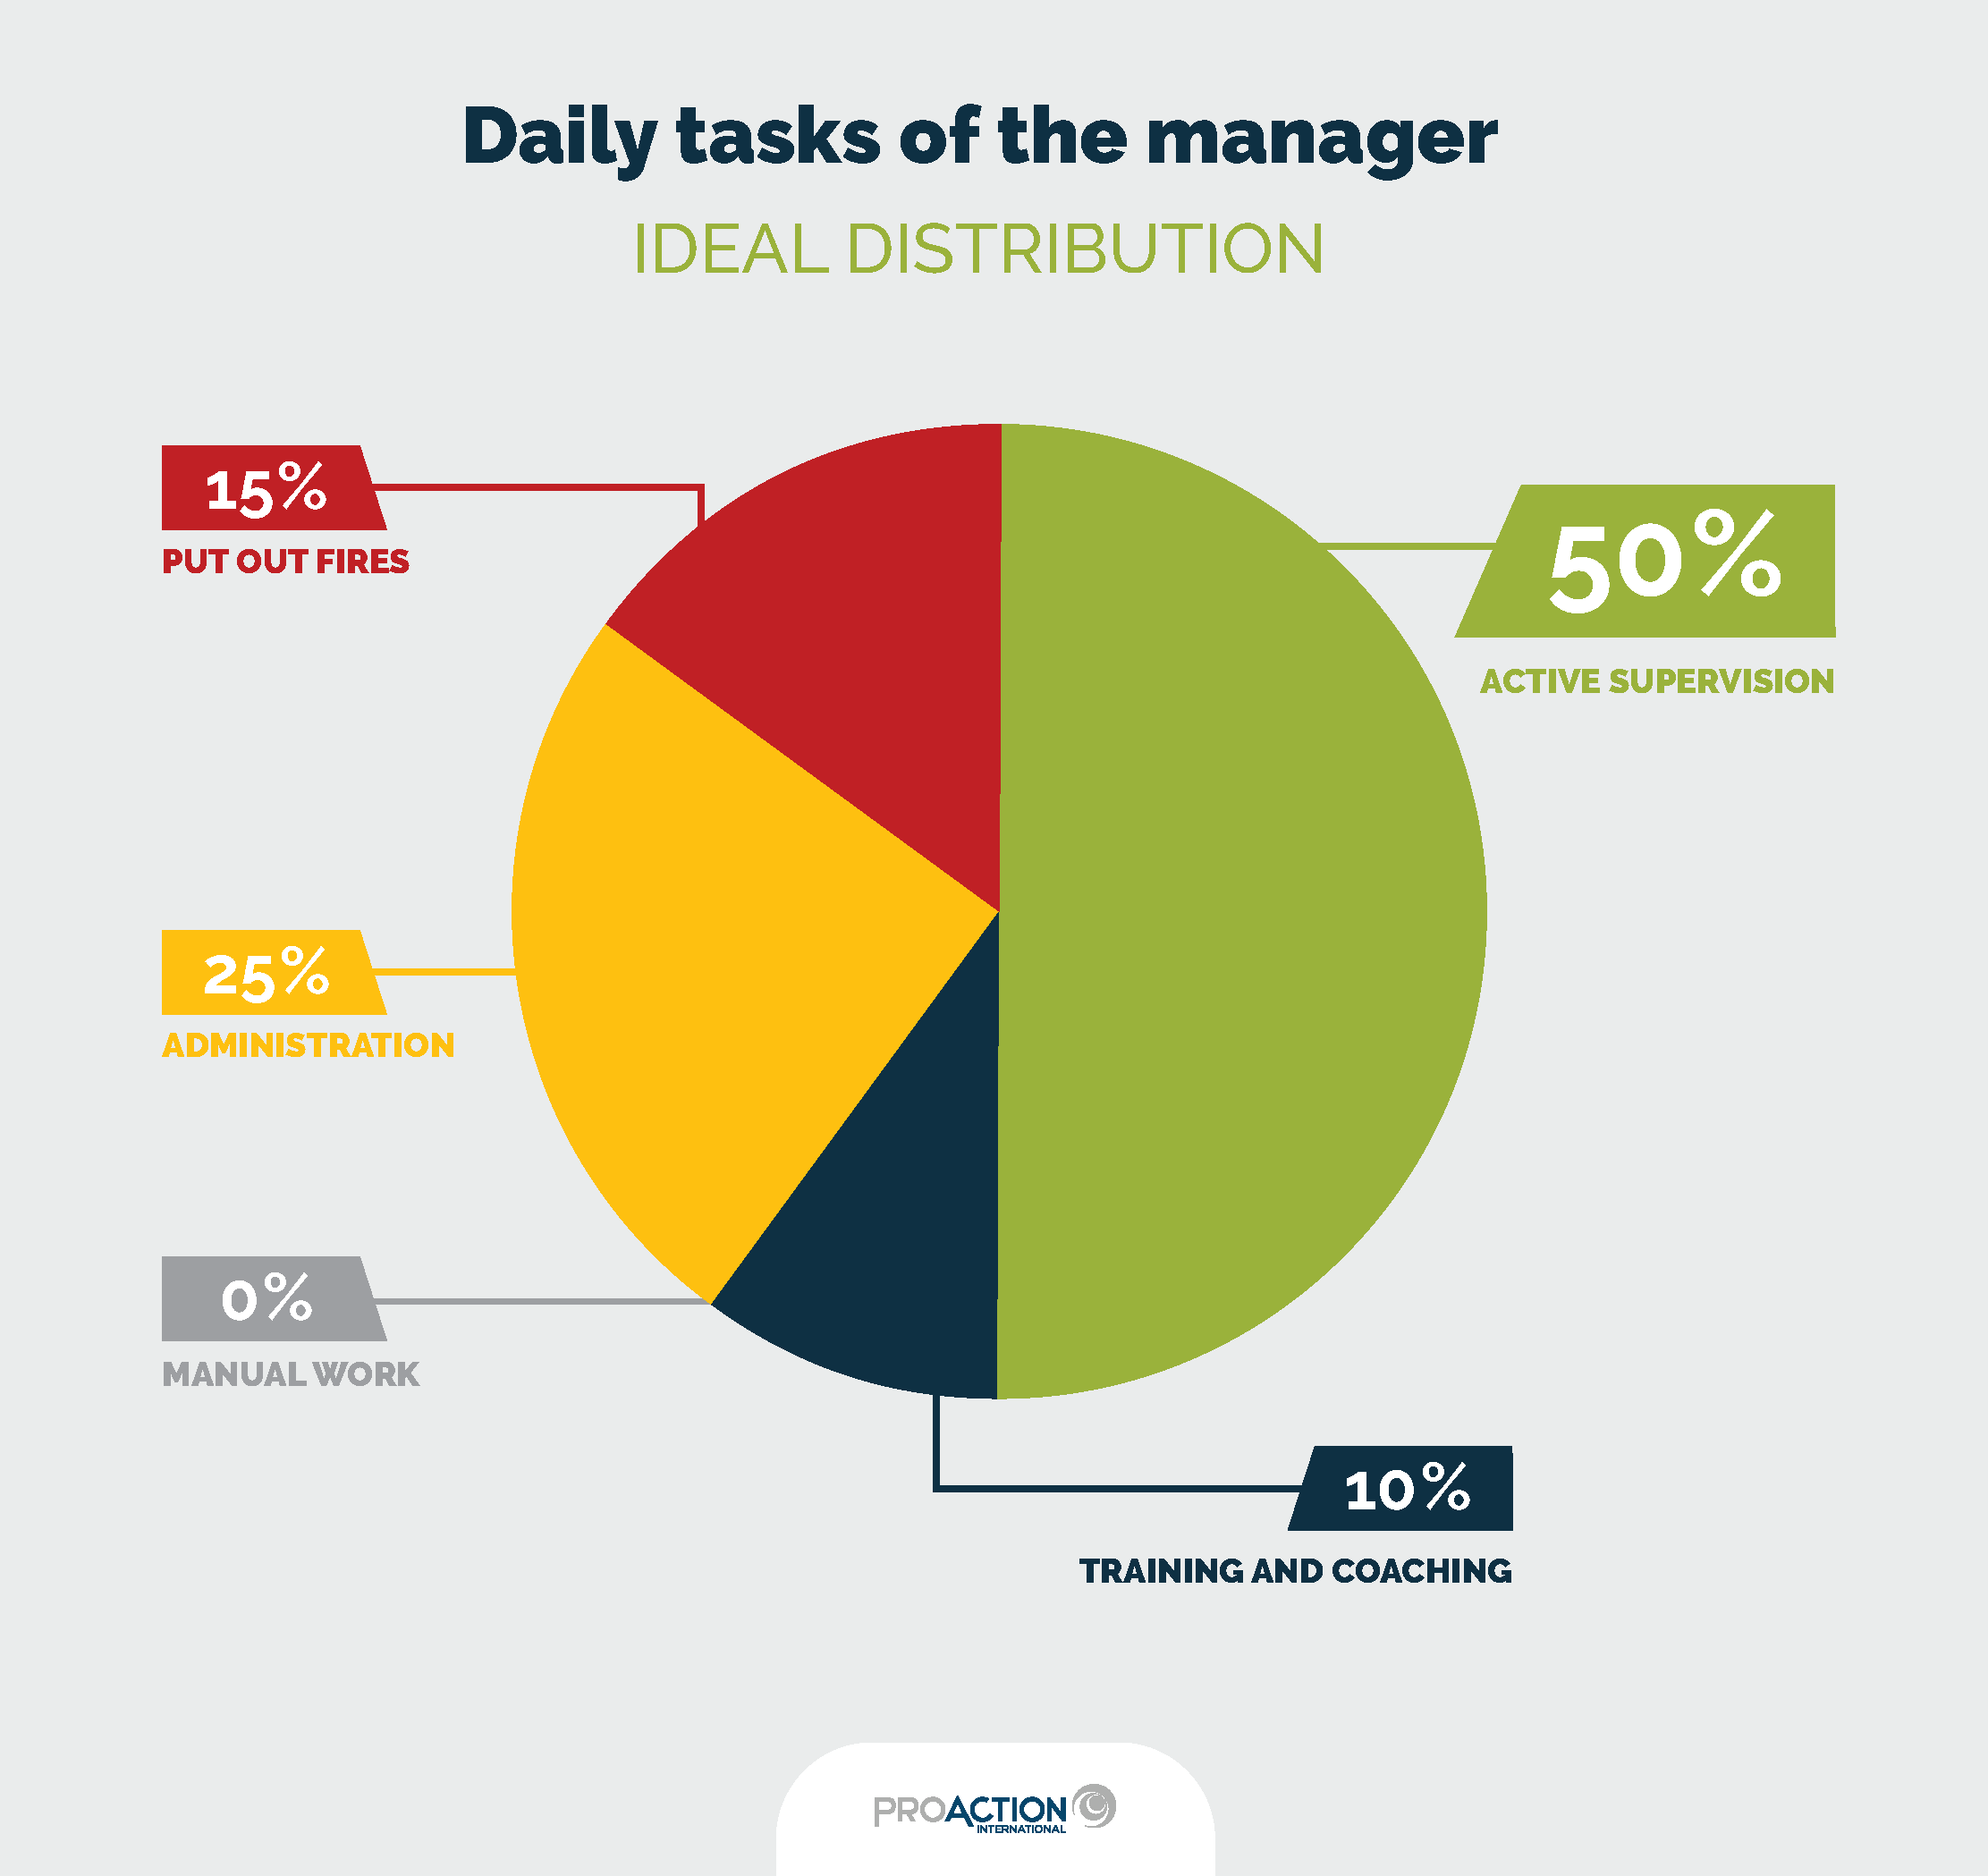 Infographics - Daily tasks of the manager, ideal distribution : 50% active supervision, 10% training and coaching, 25% administration, 15% put out fires, 0% manual work